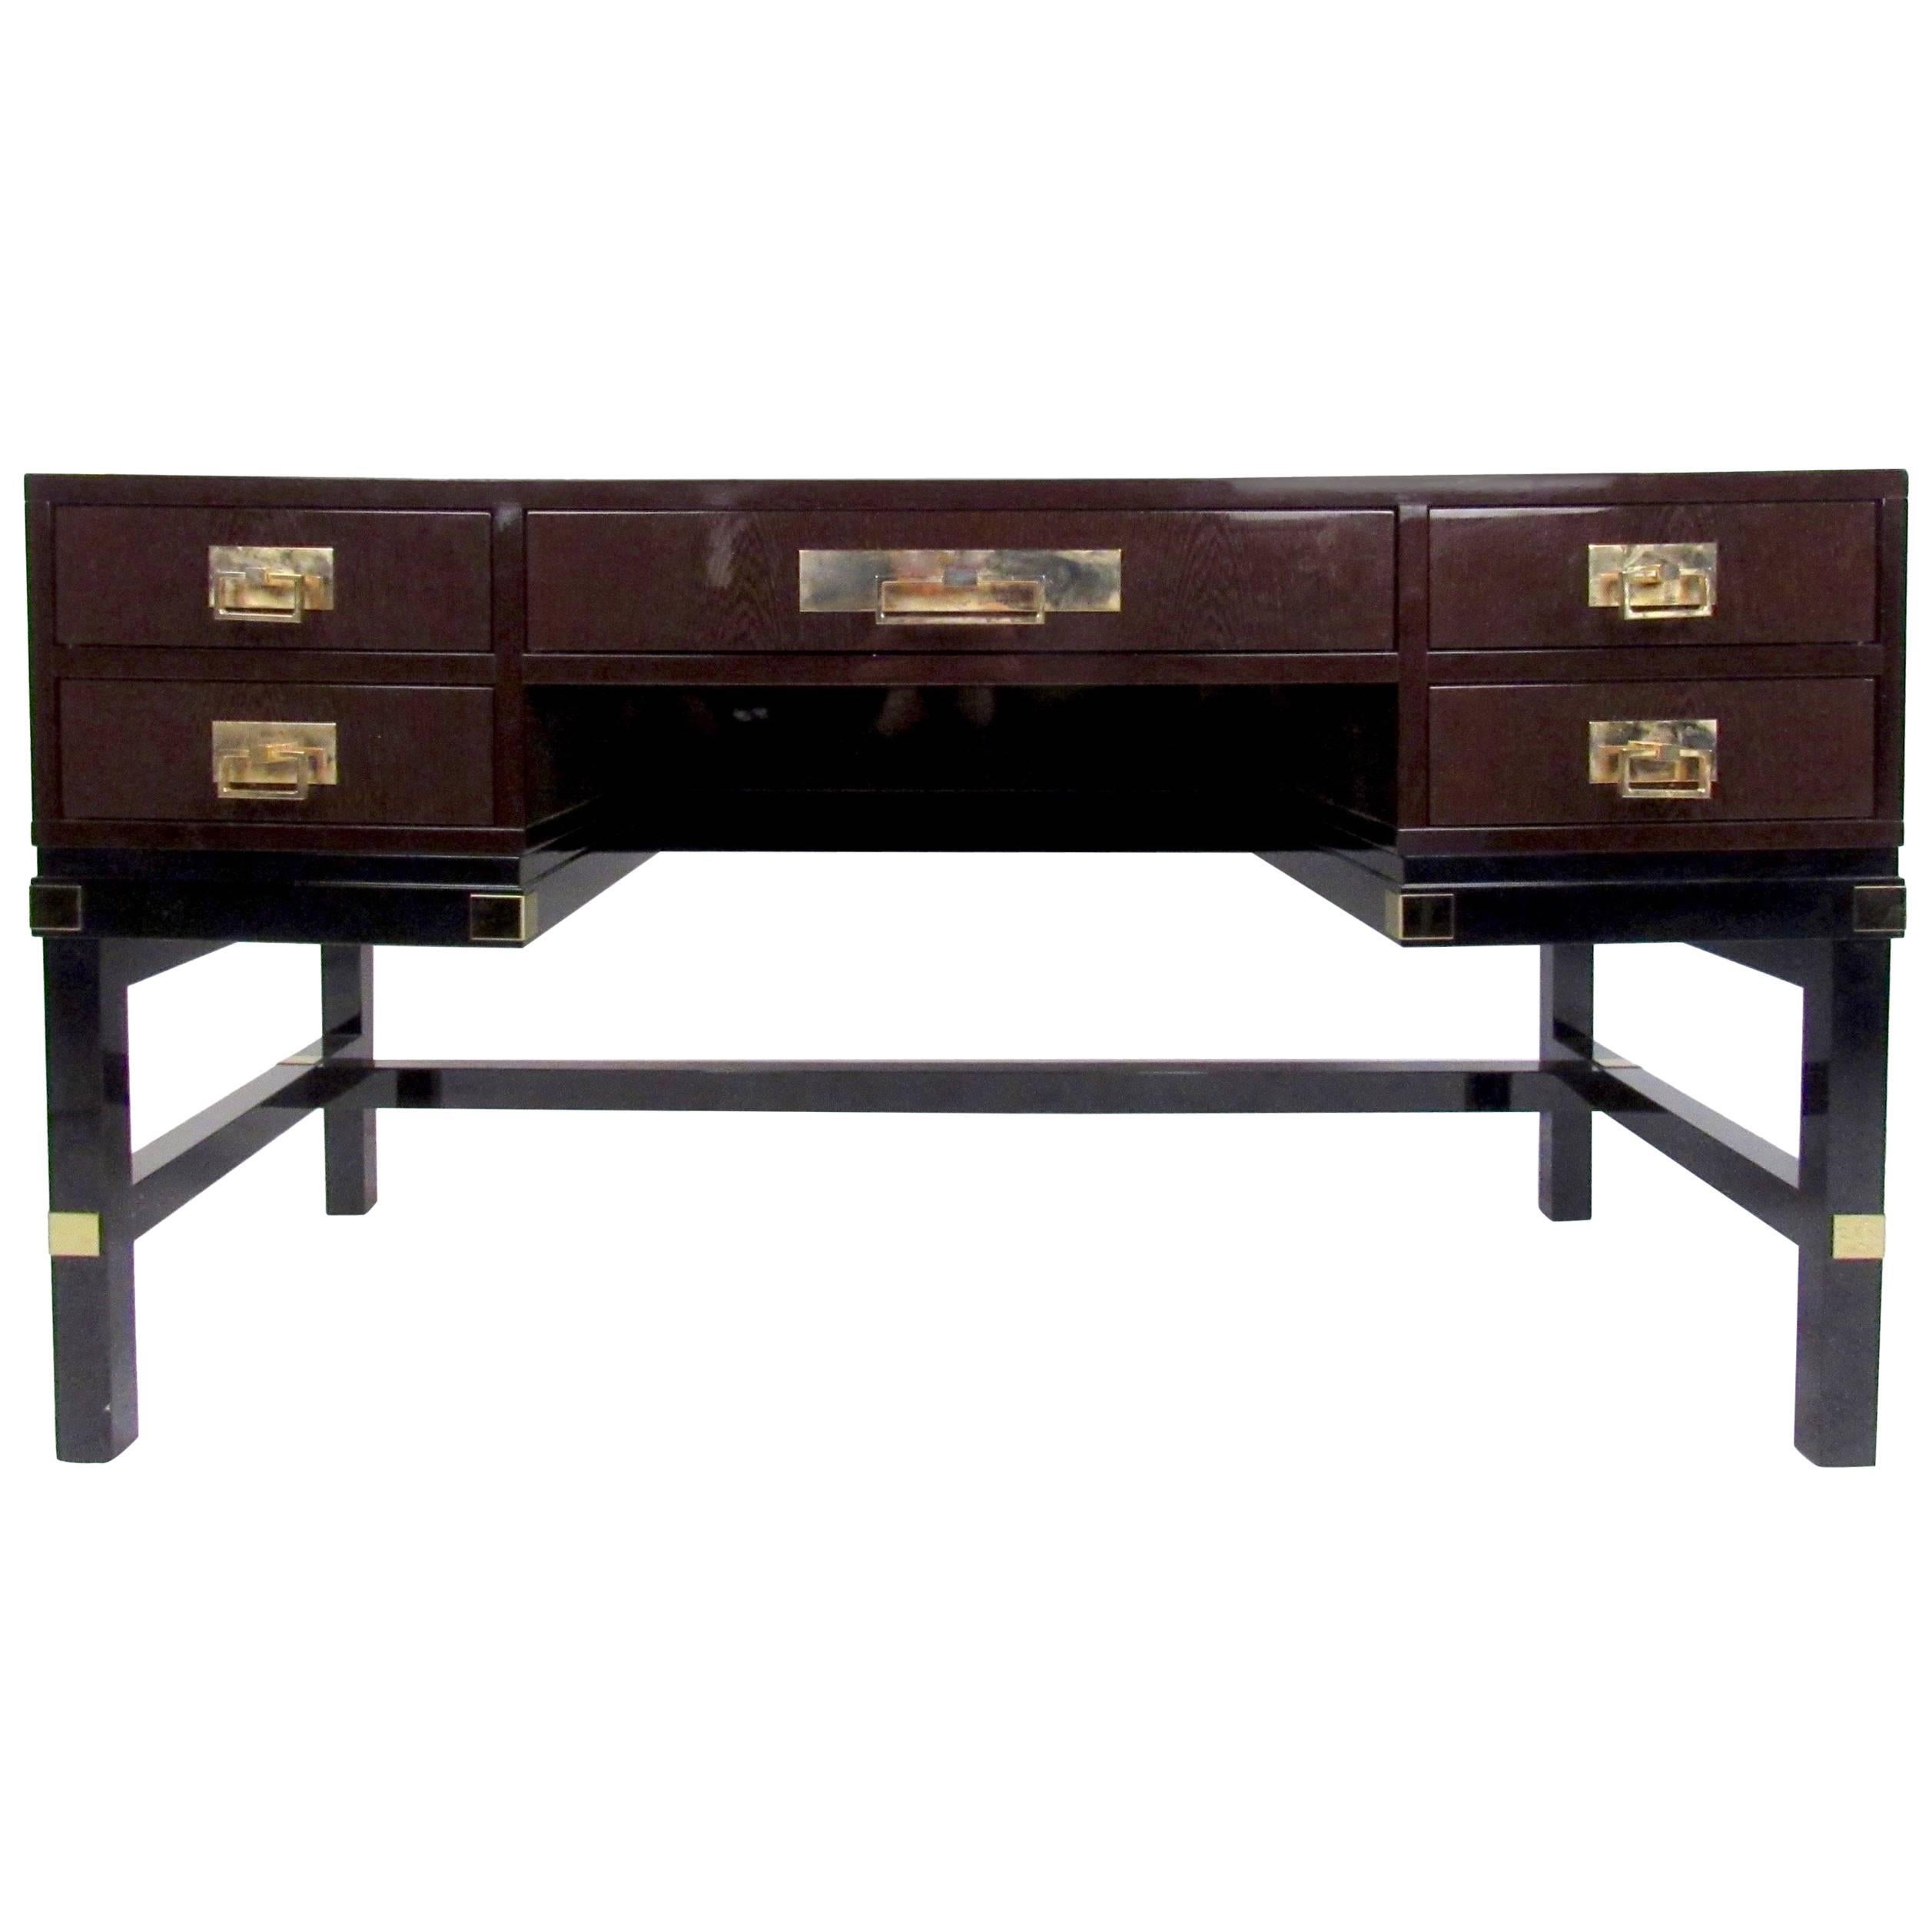 Classic Campaign Desk in Mahogany and Brass